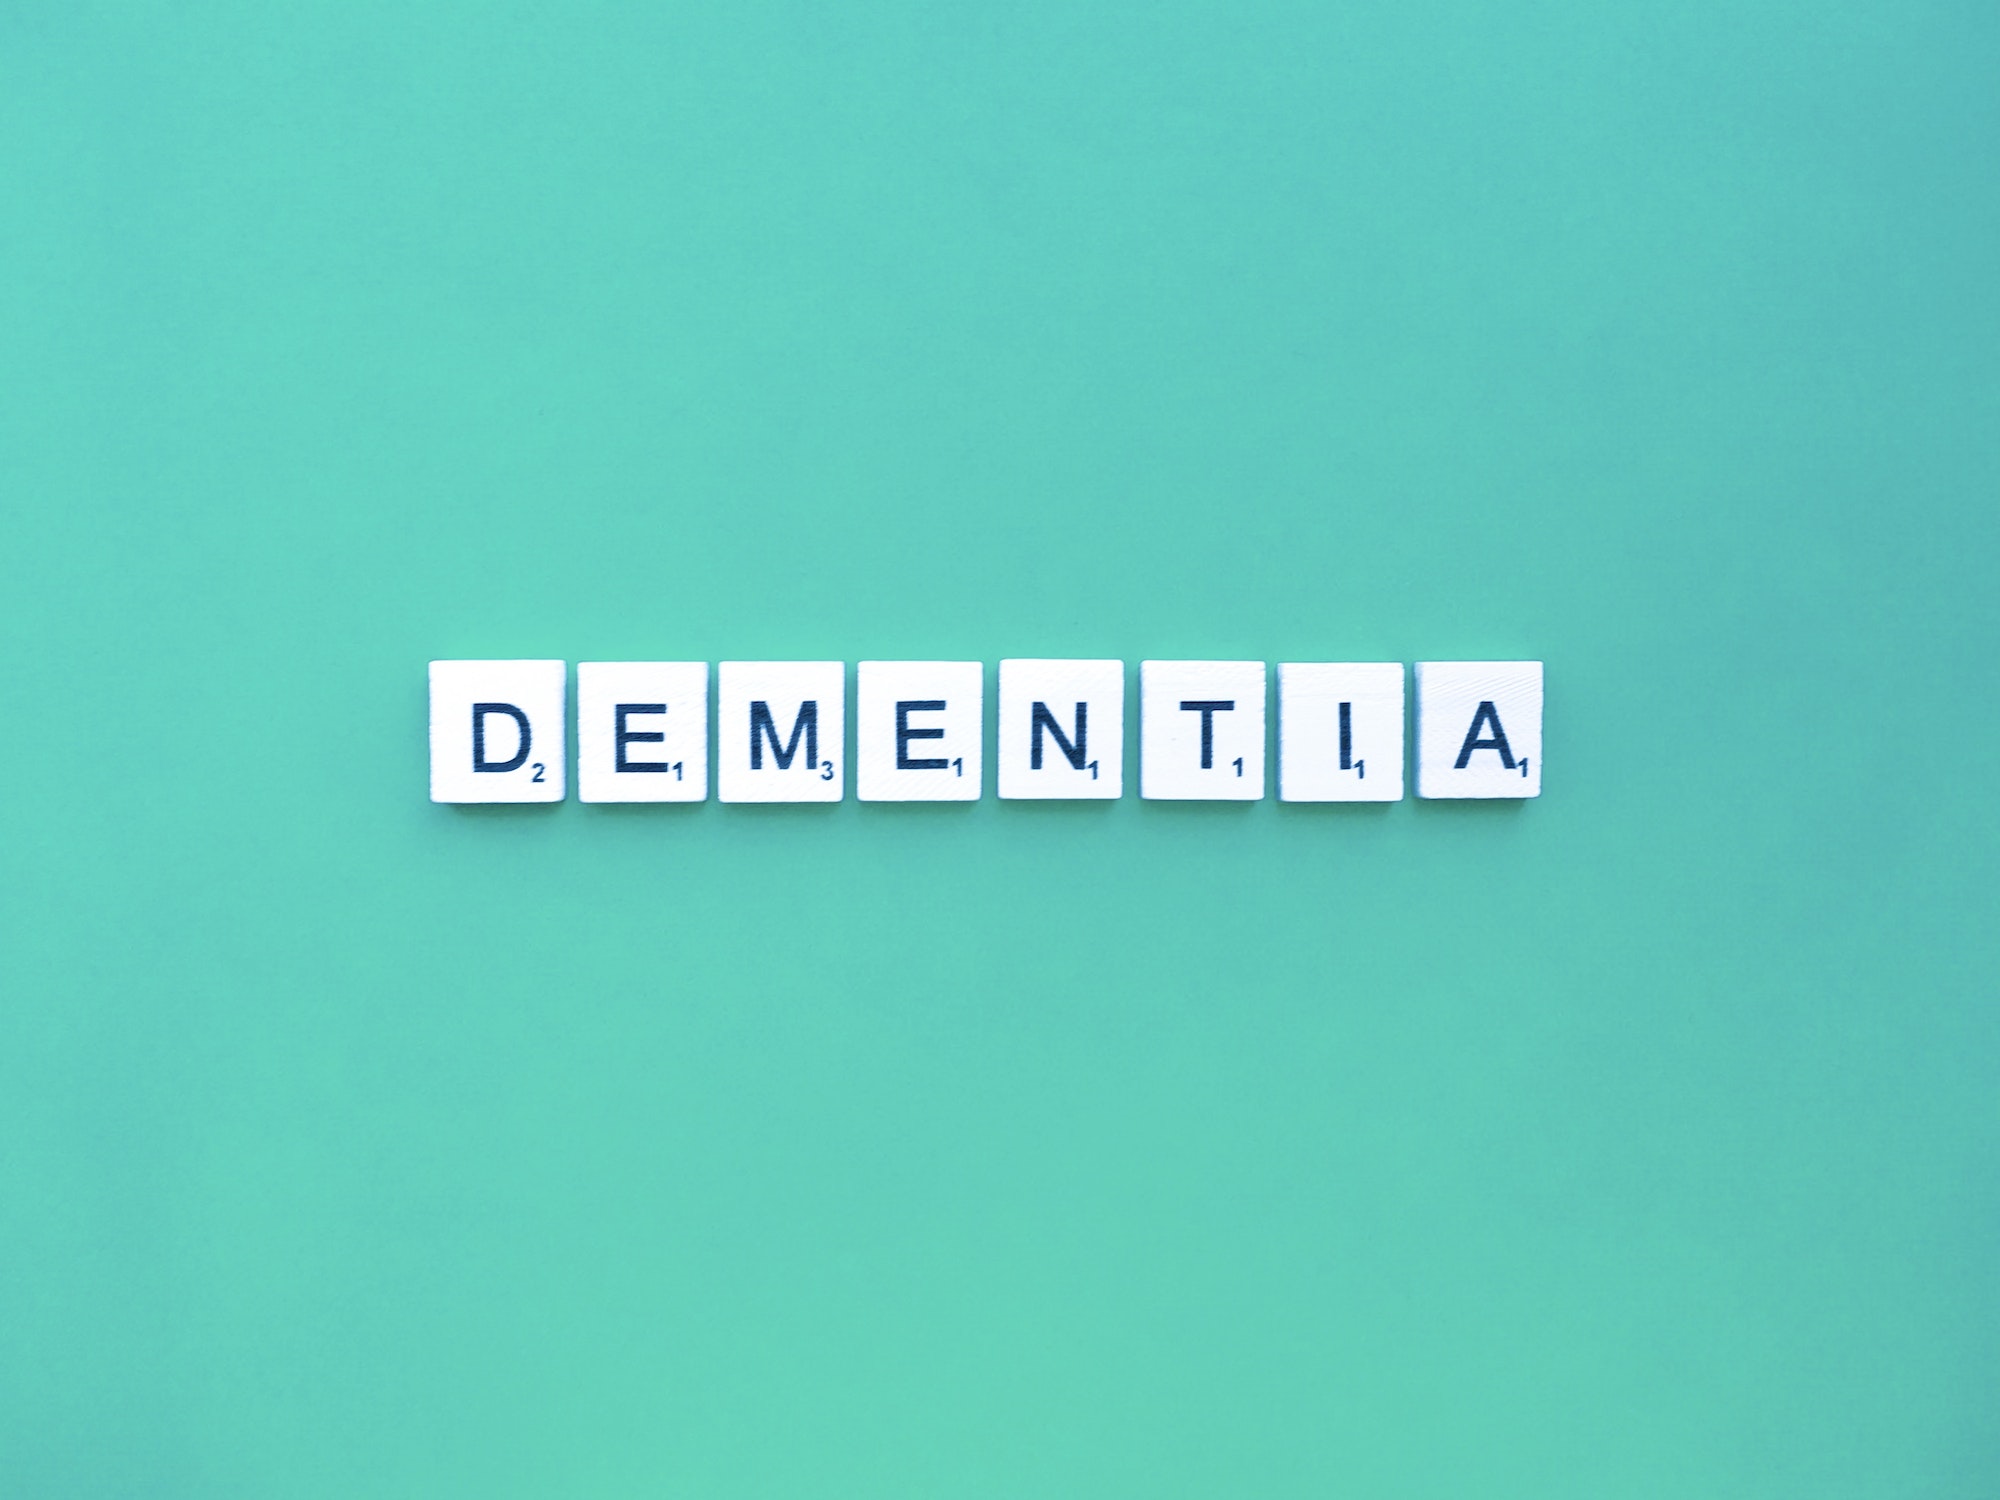 Dementia letters word on a green background